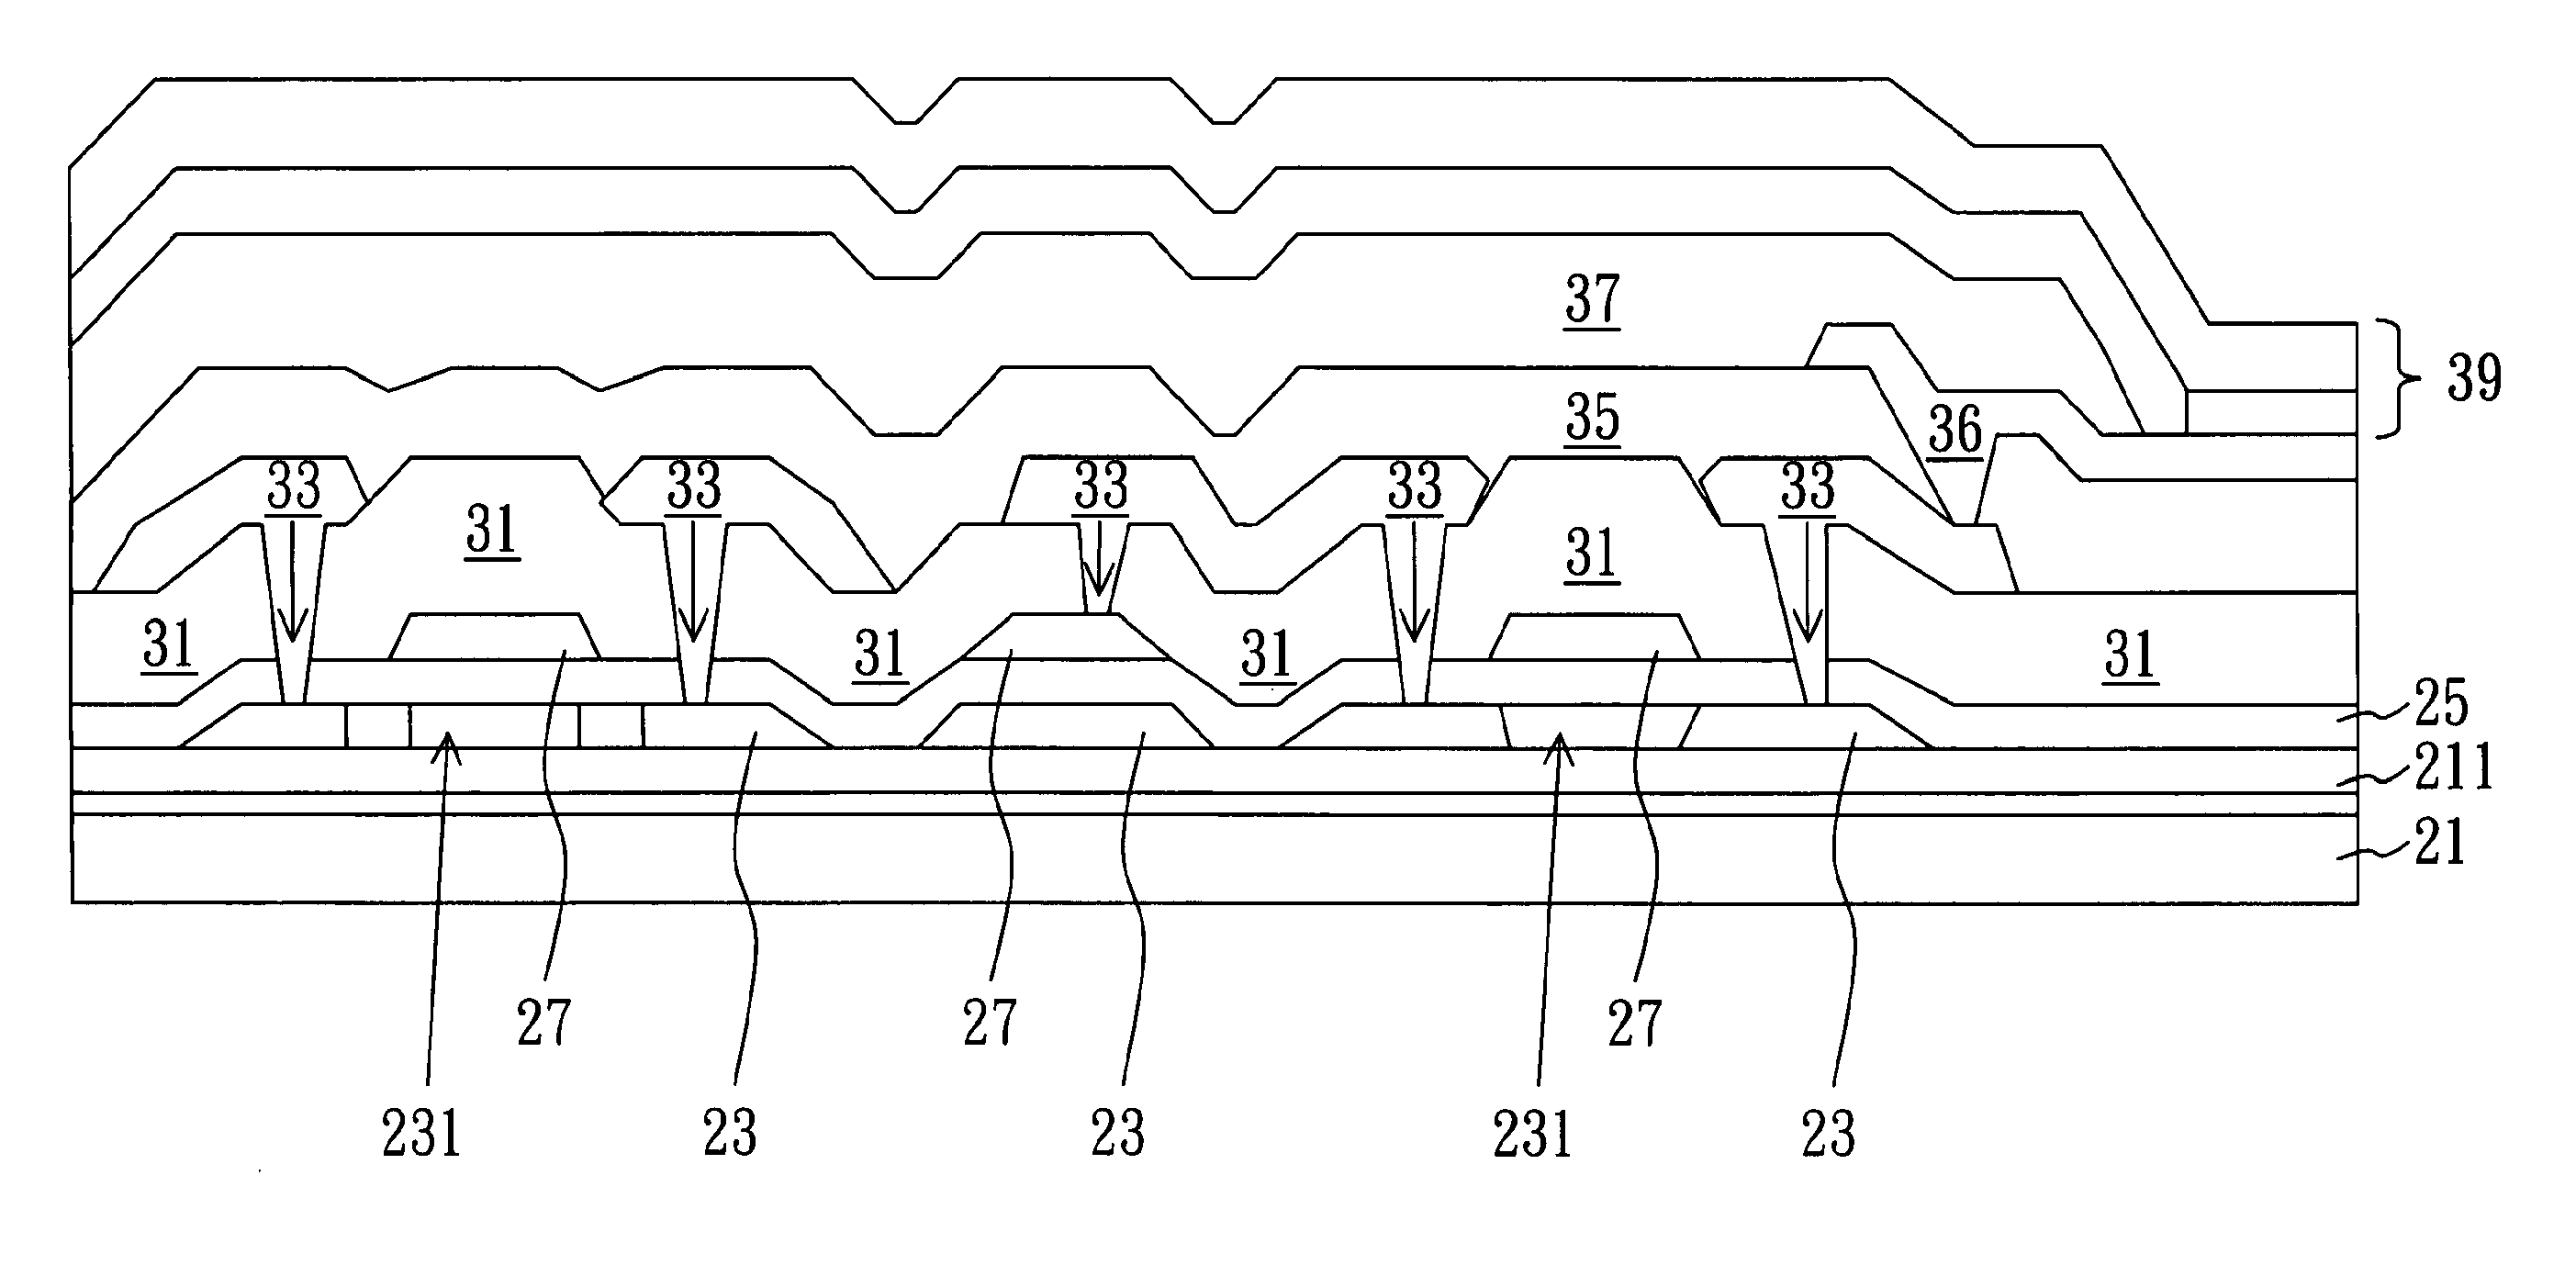 Low temperature polysilicon thin film transistor display and method of fabricating the same